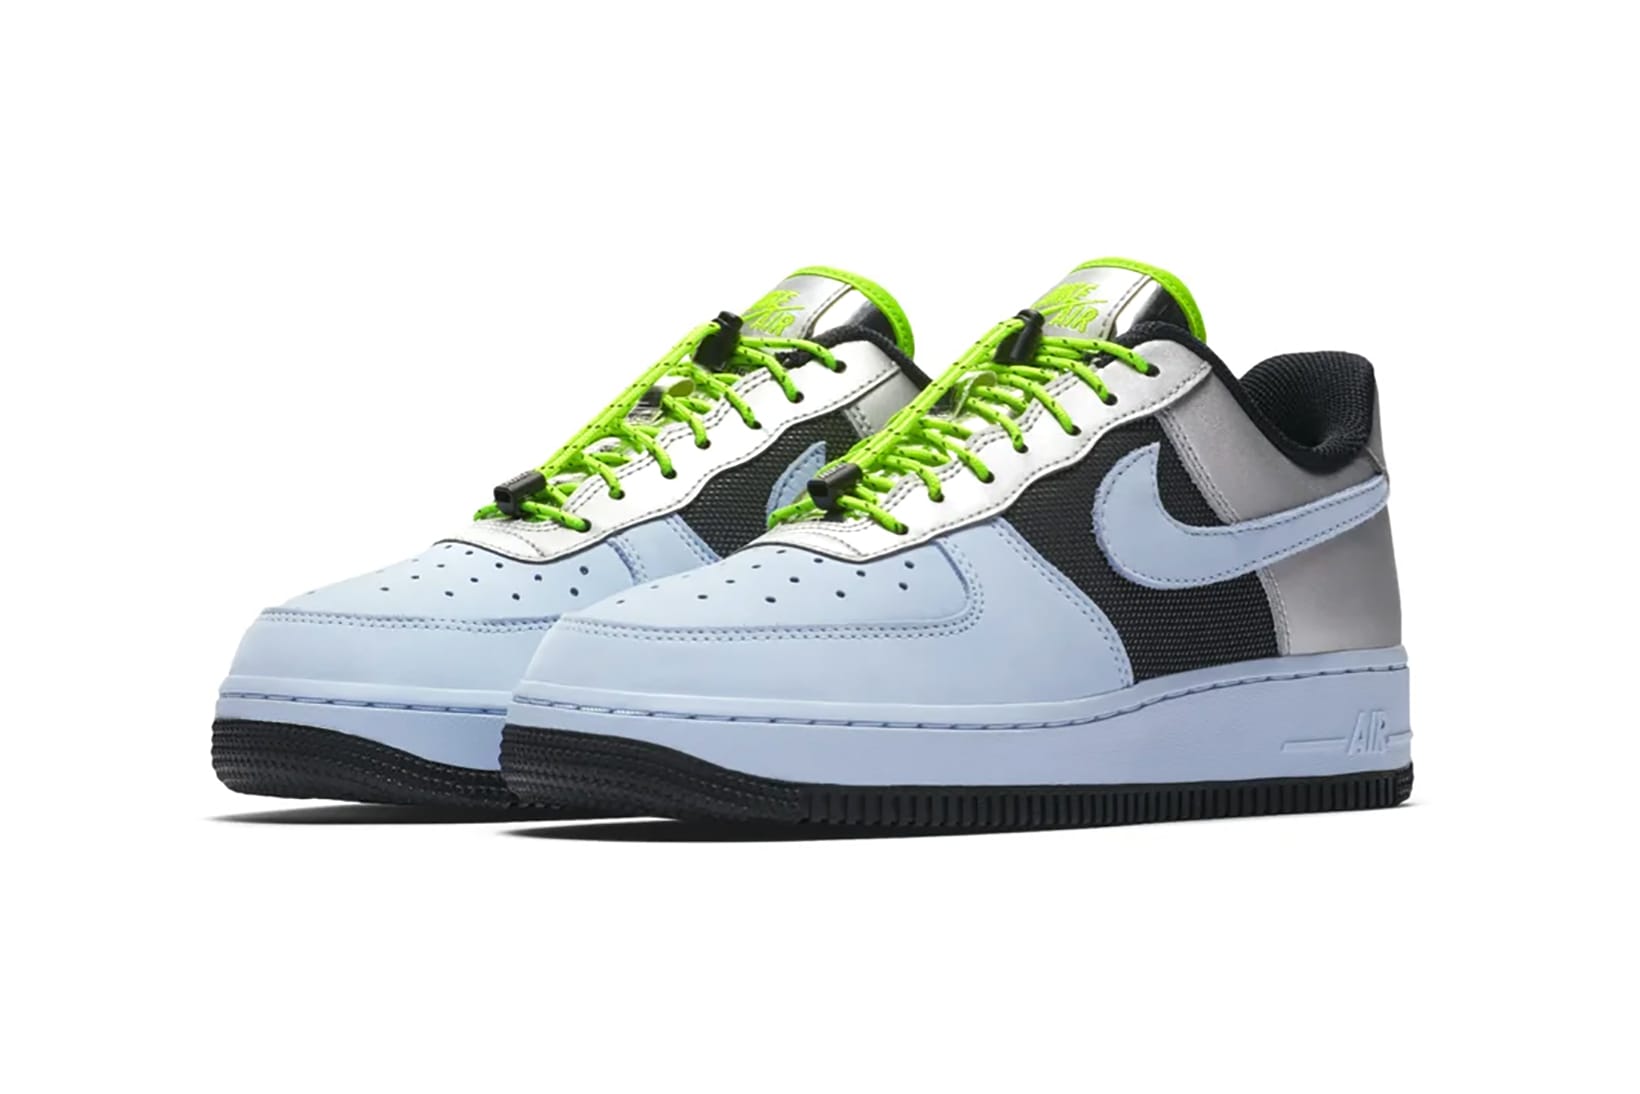 blue and silver air force ones